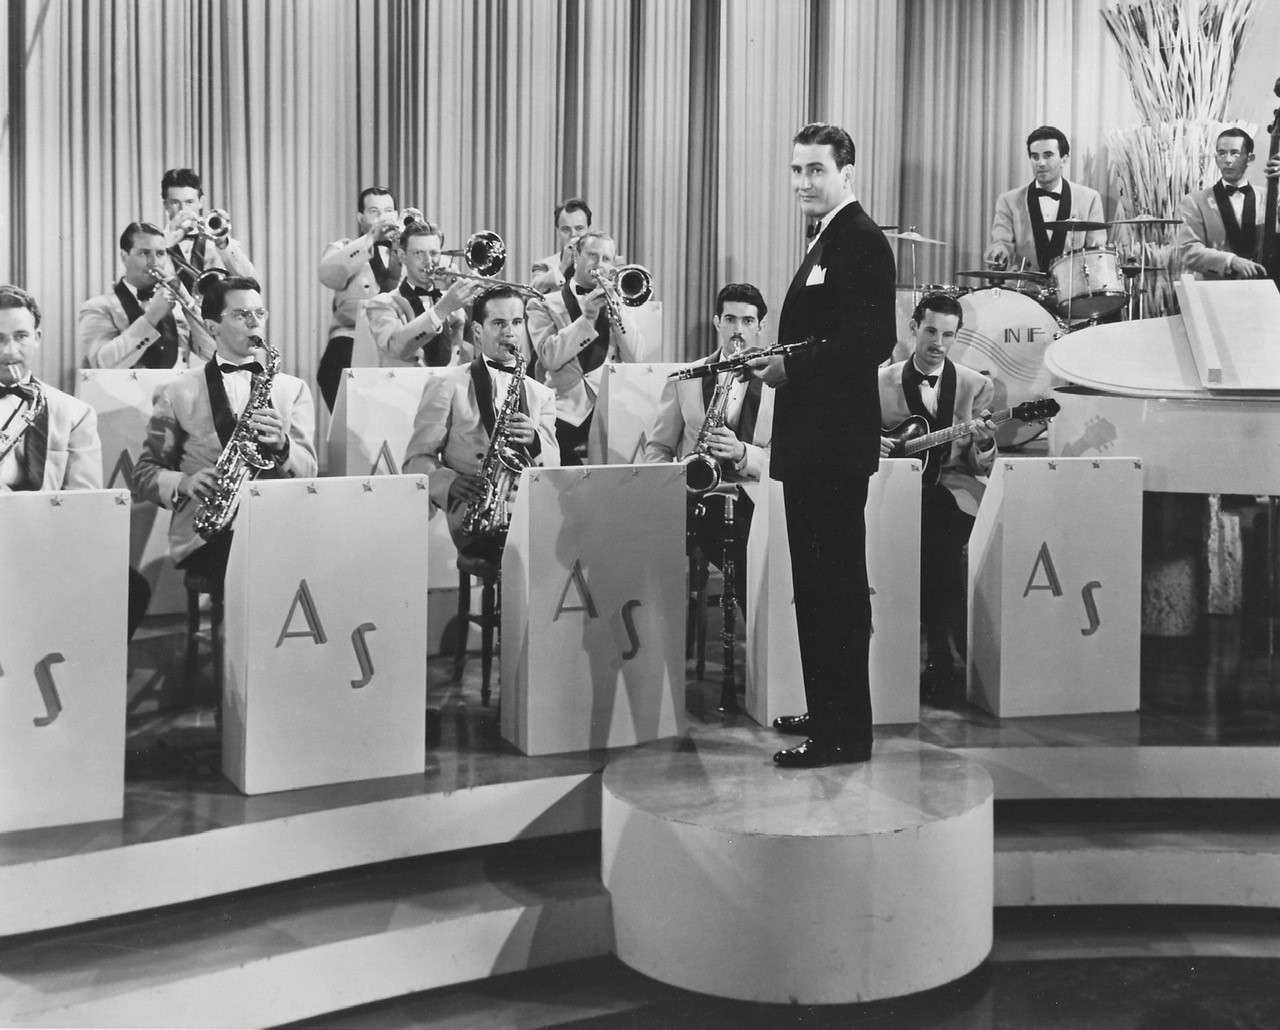 Artie Shaw: Time Is All You’ve Got